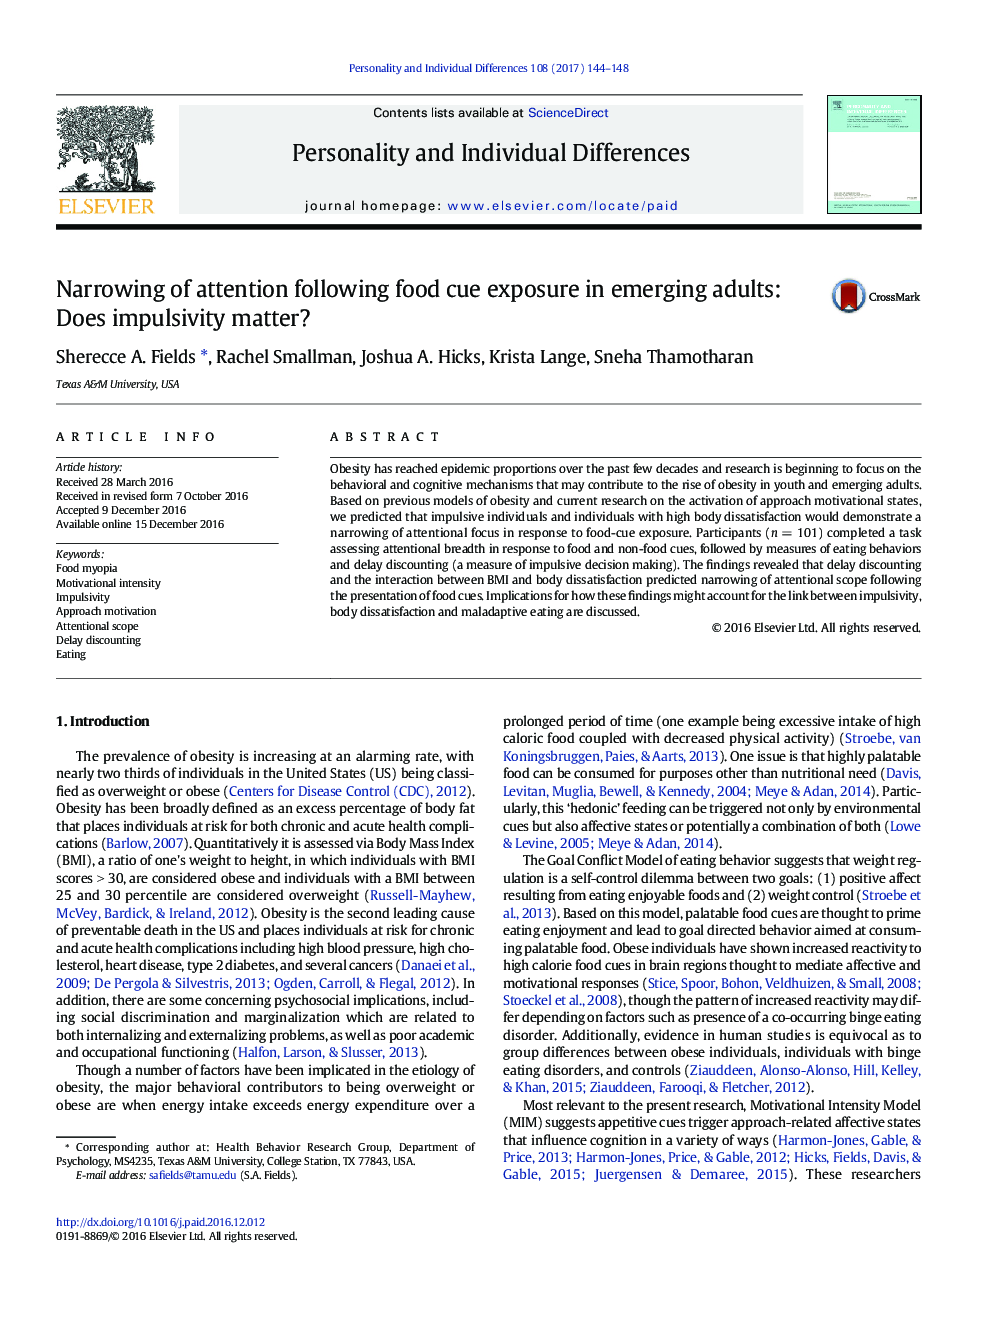 Narrowing of attention following food cue exposure in emerging adults: Does impulsivity matter?